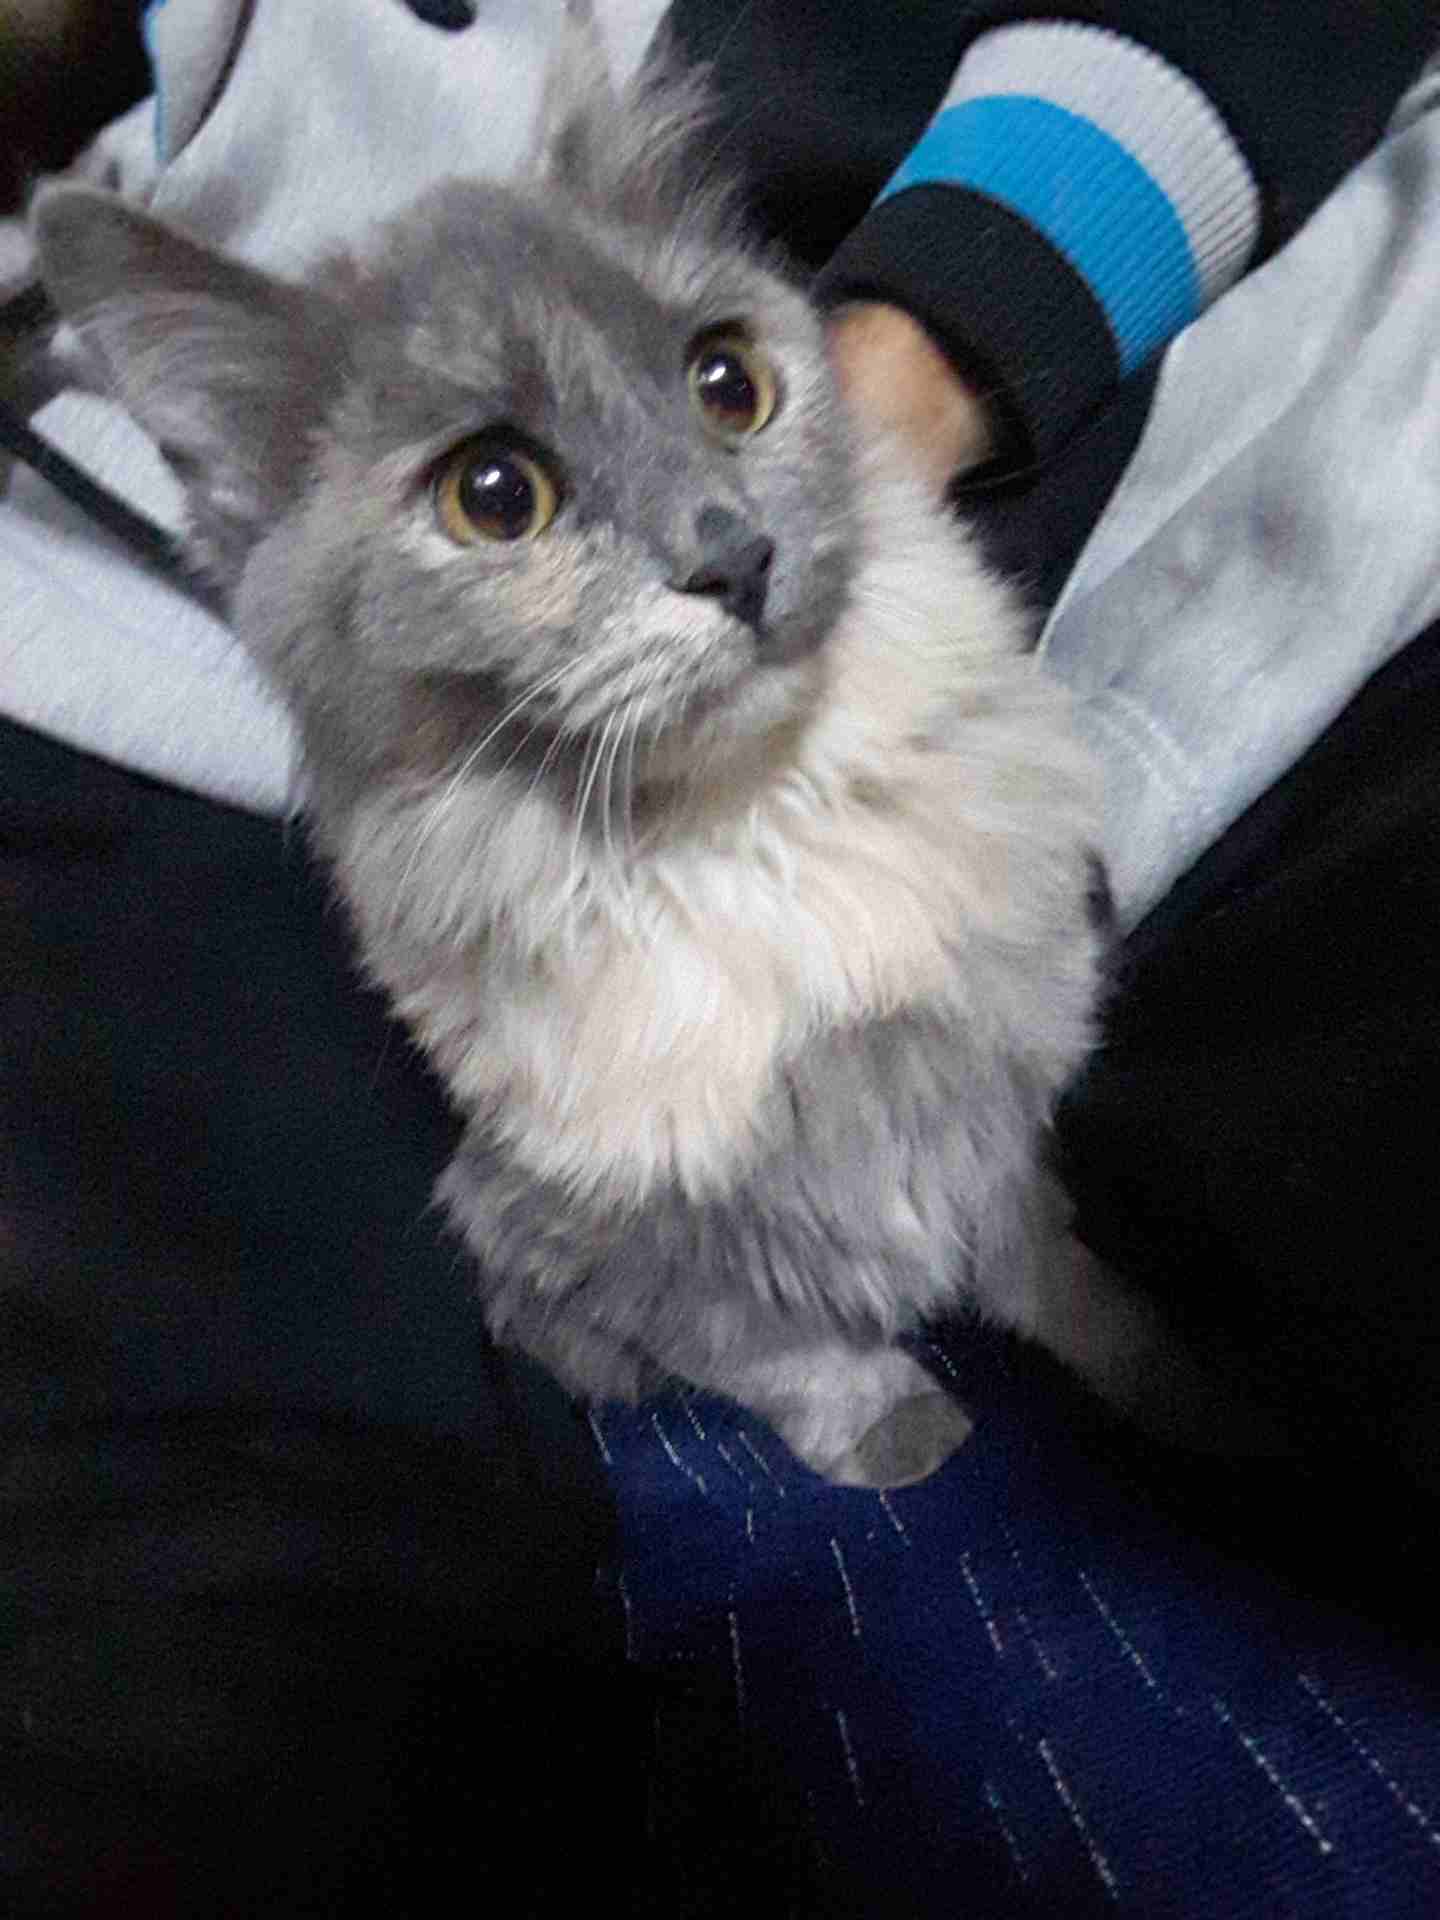 Three Months old Persian kittens قطط شيرازية بعمر ثلاثة أشهر3 months old Persian kittens. Vaccinated, Dewormed, Checked by a vet and litt-  قطه شنشيلا لا تنسَ أنك...